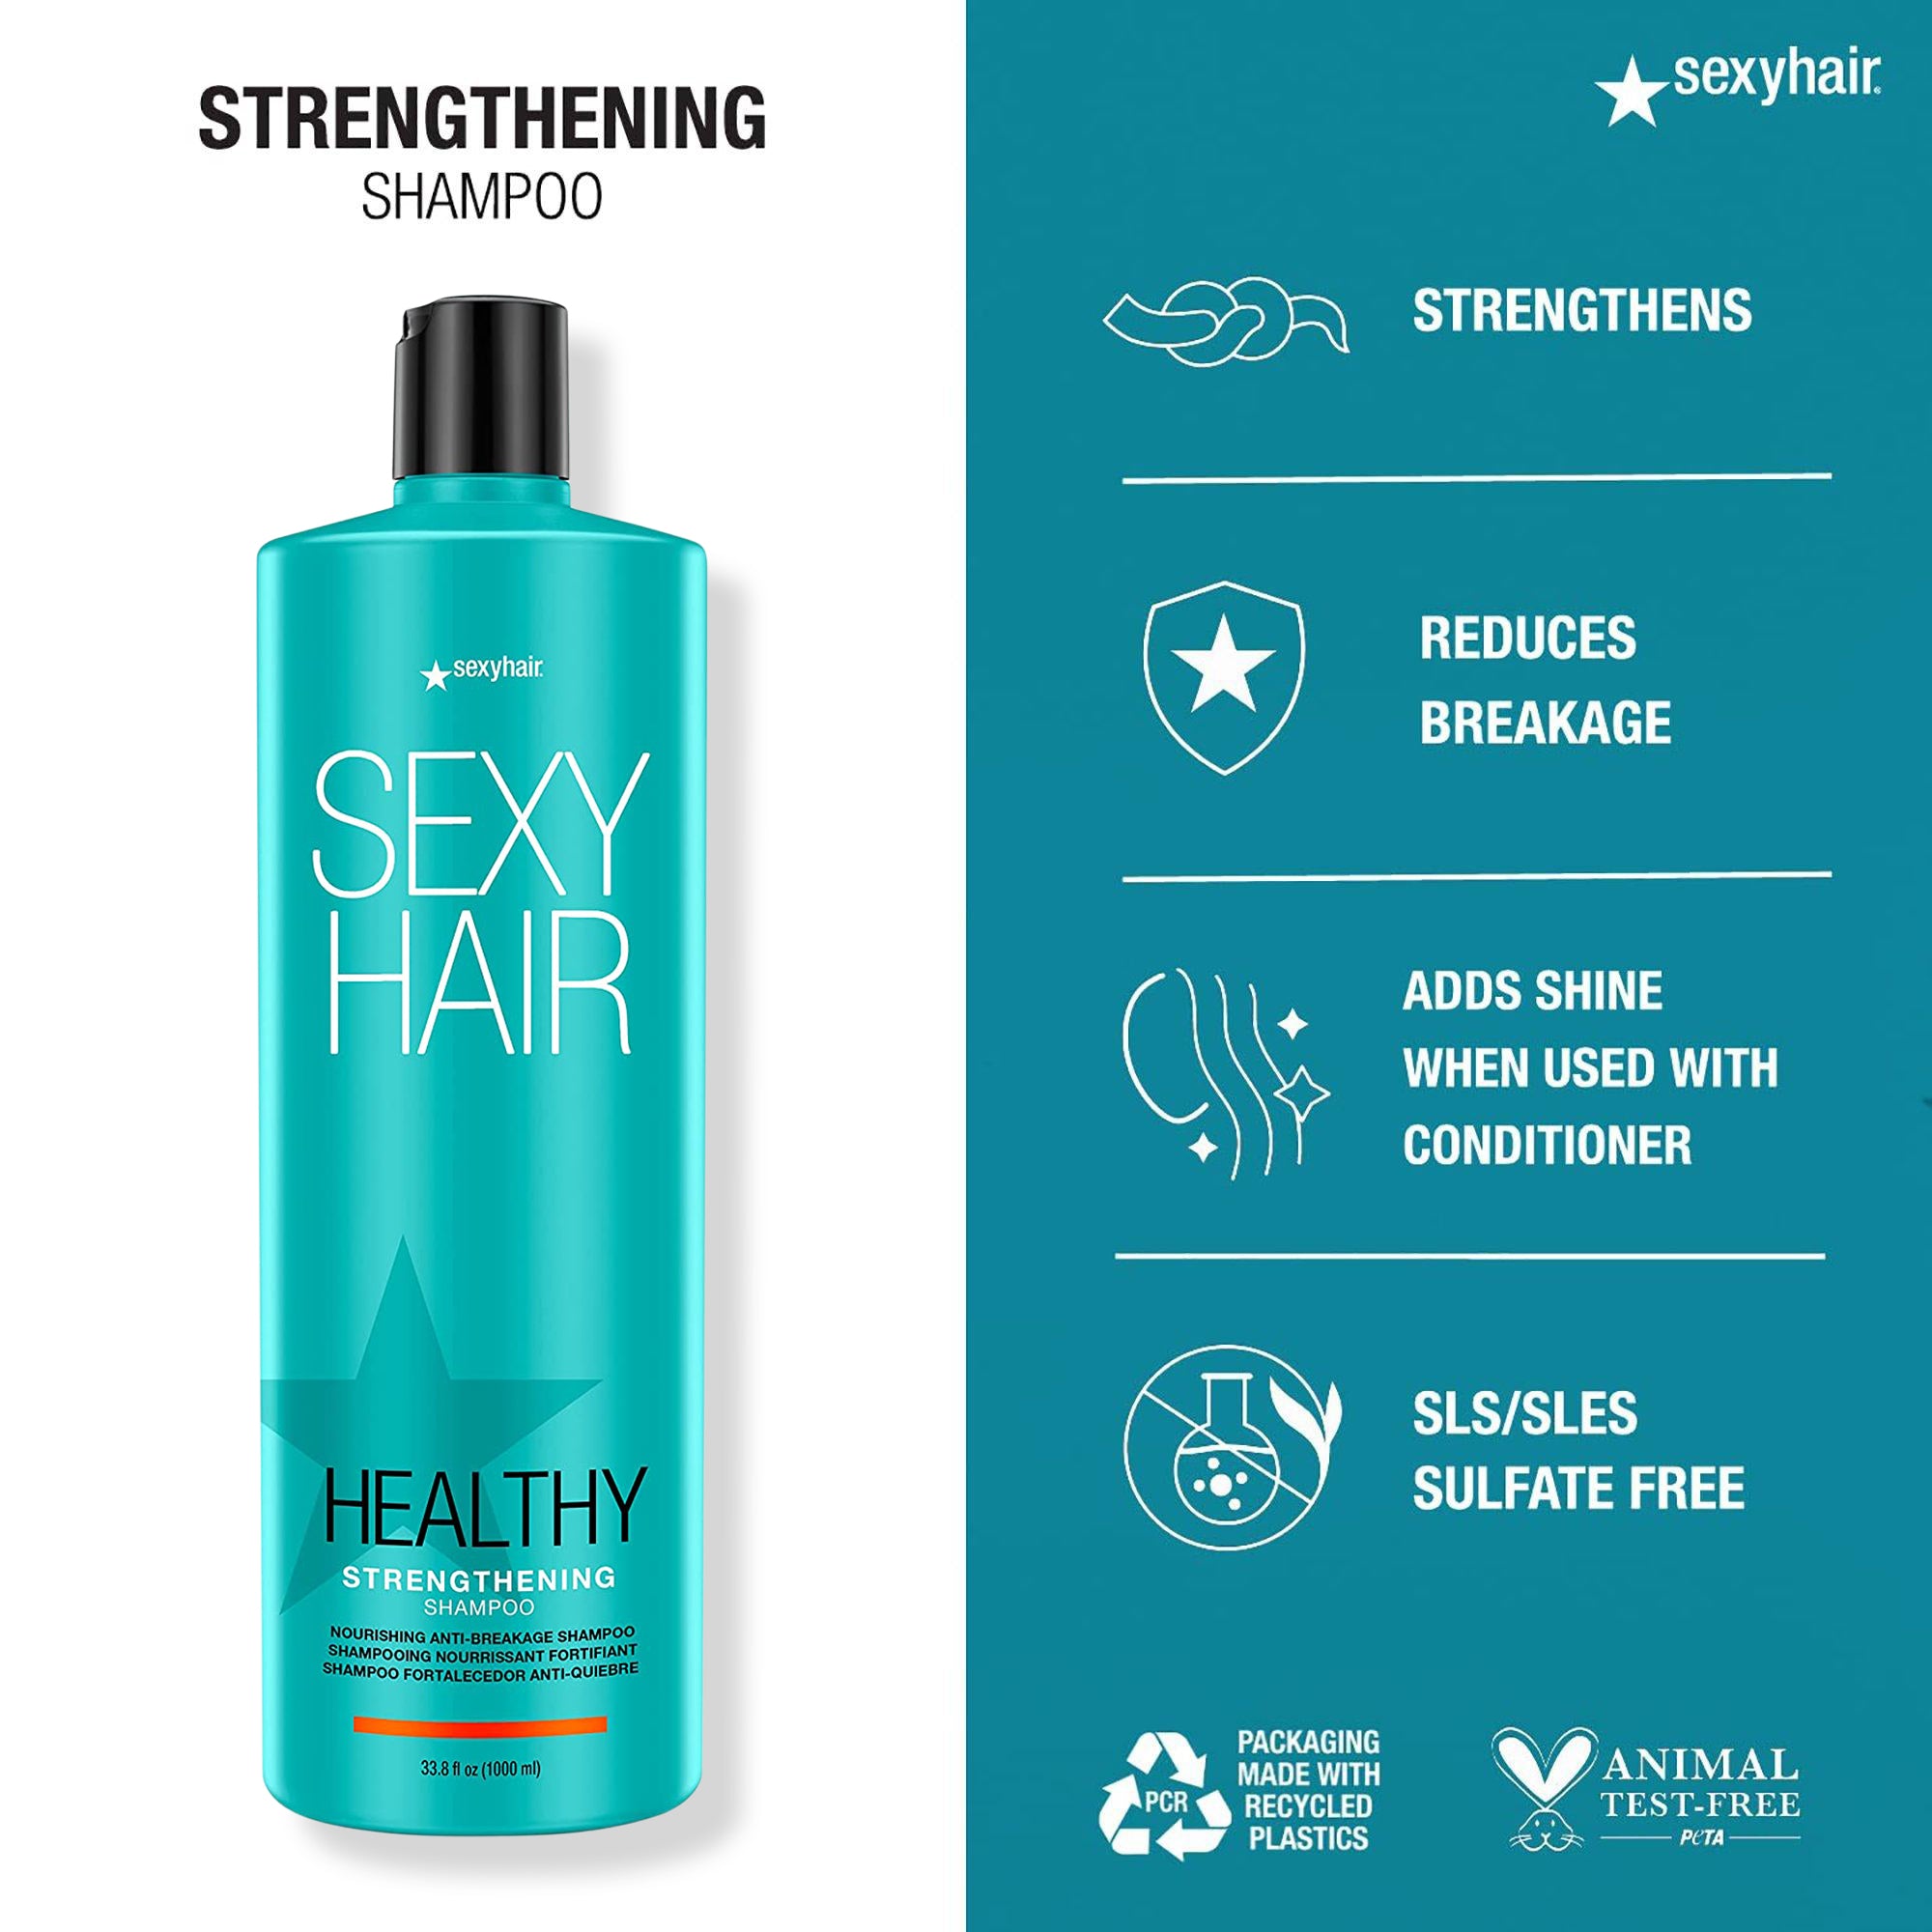 Sexy Hair Healthy SexyHair Strengthening Shampoo and Conditioner Liter Duo / 33.OZ